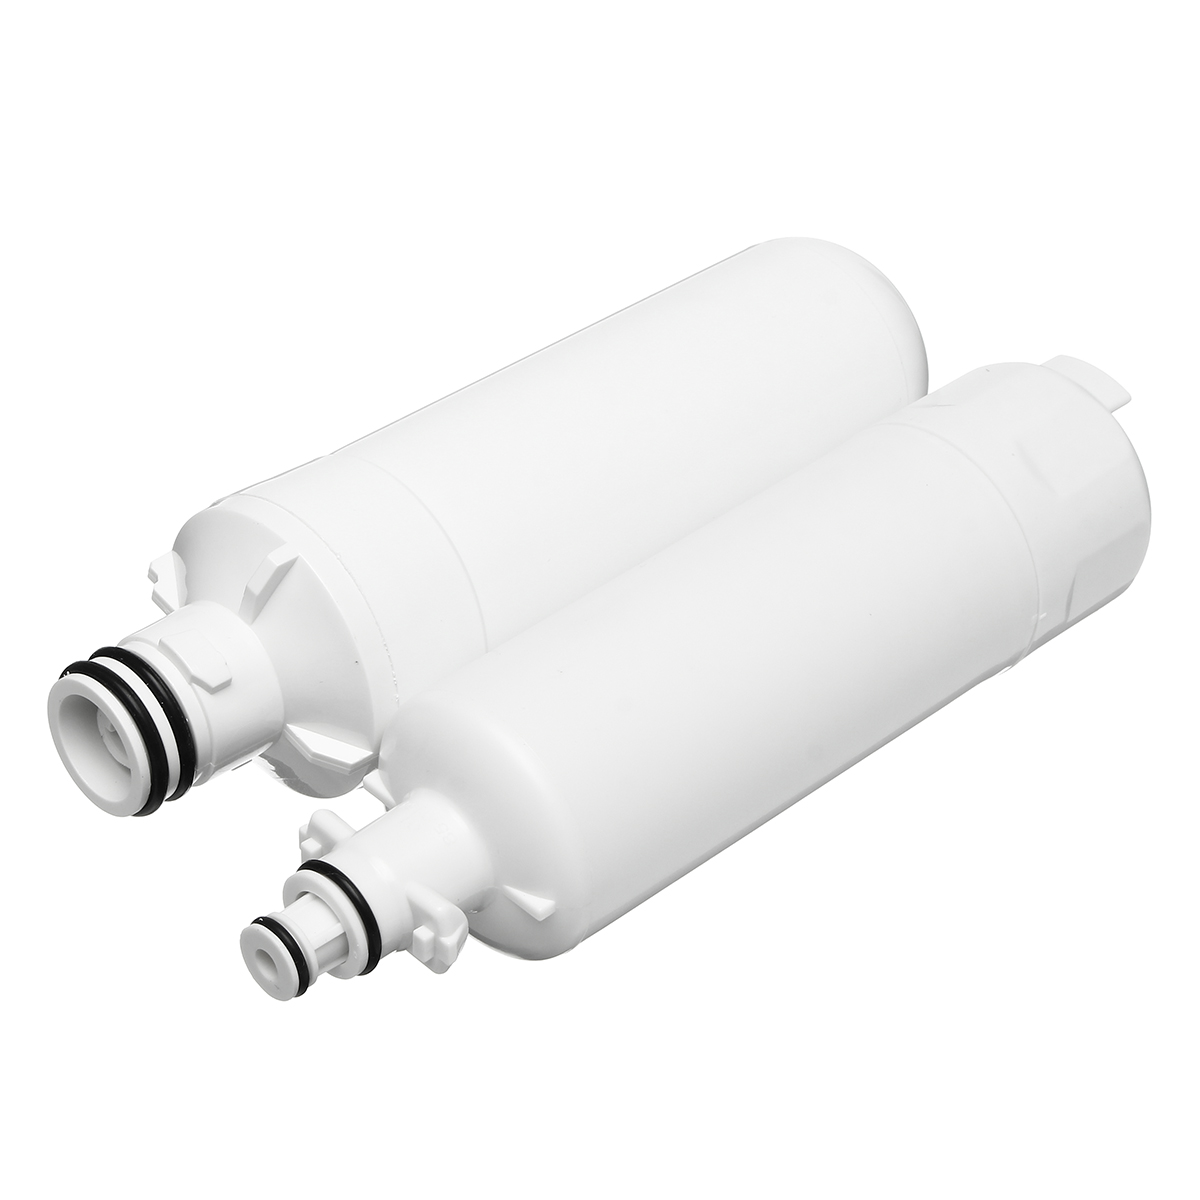 Refrigerator-Water-Filter-Replacement-Cartridge-for--LG-LT700P-LT1000P-1540596-6